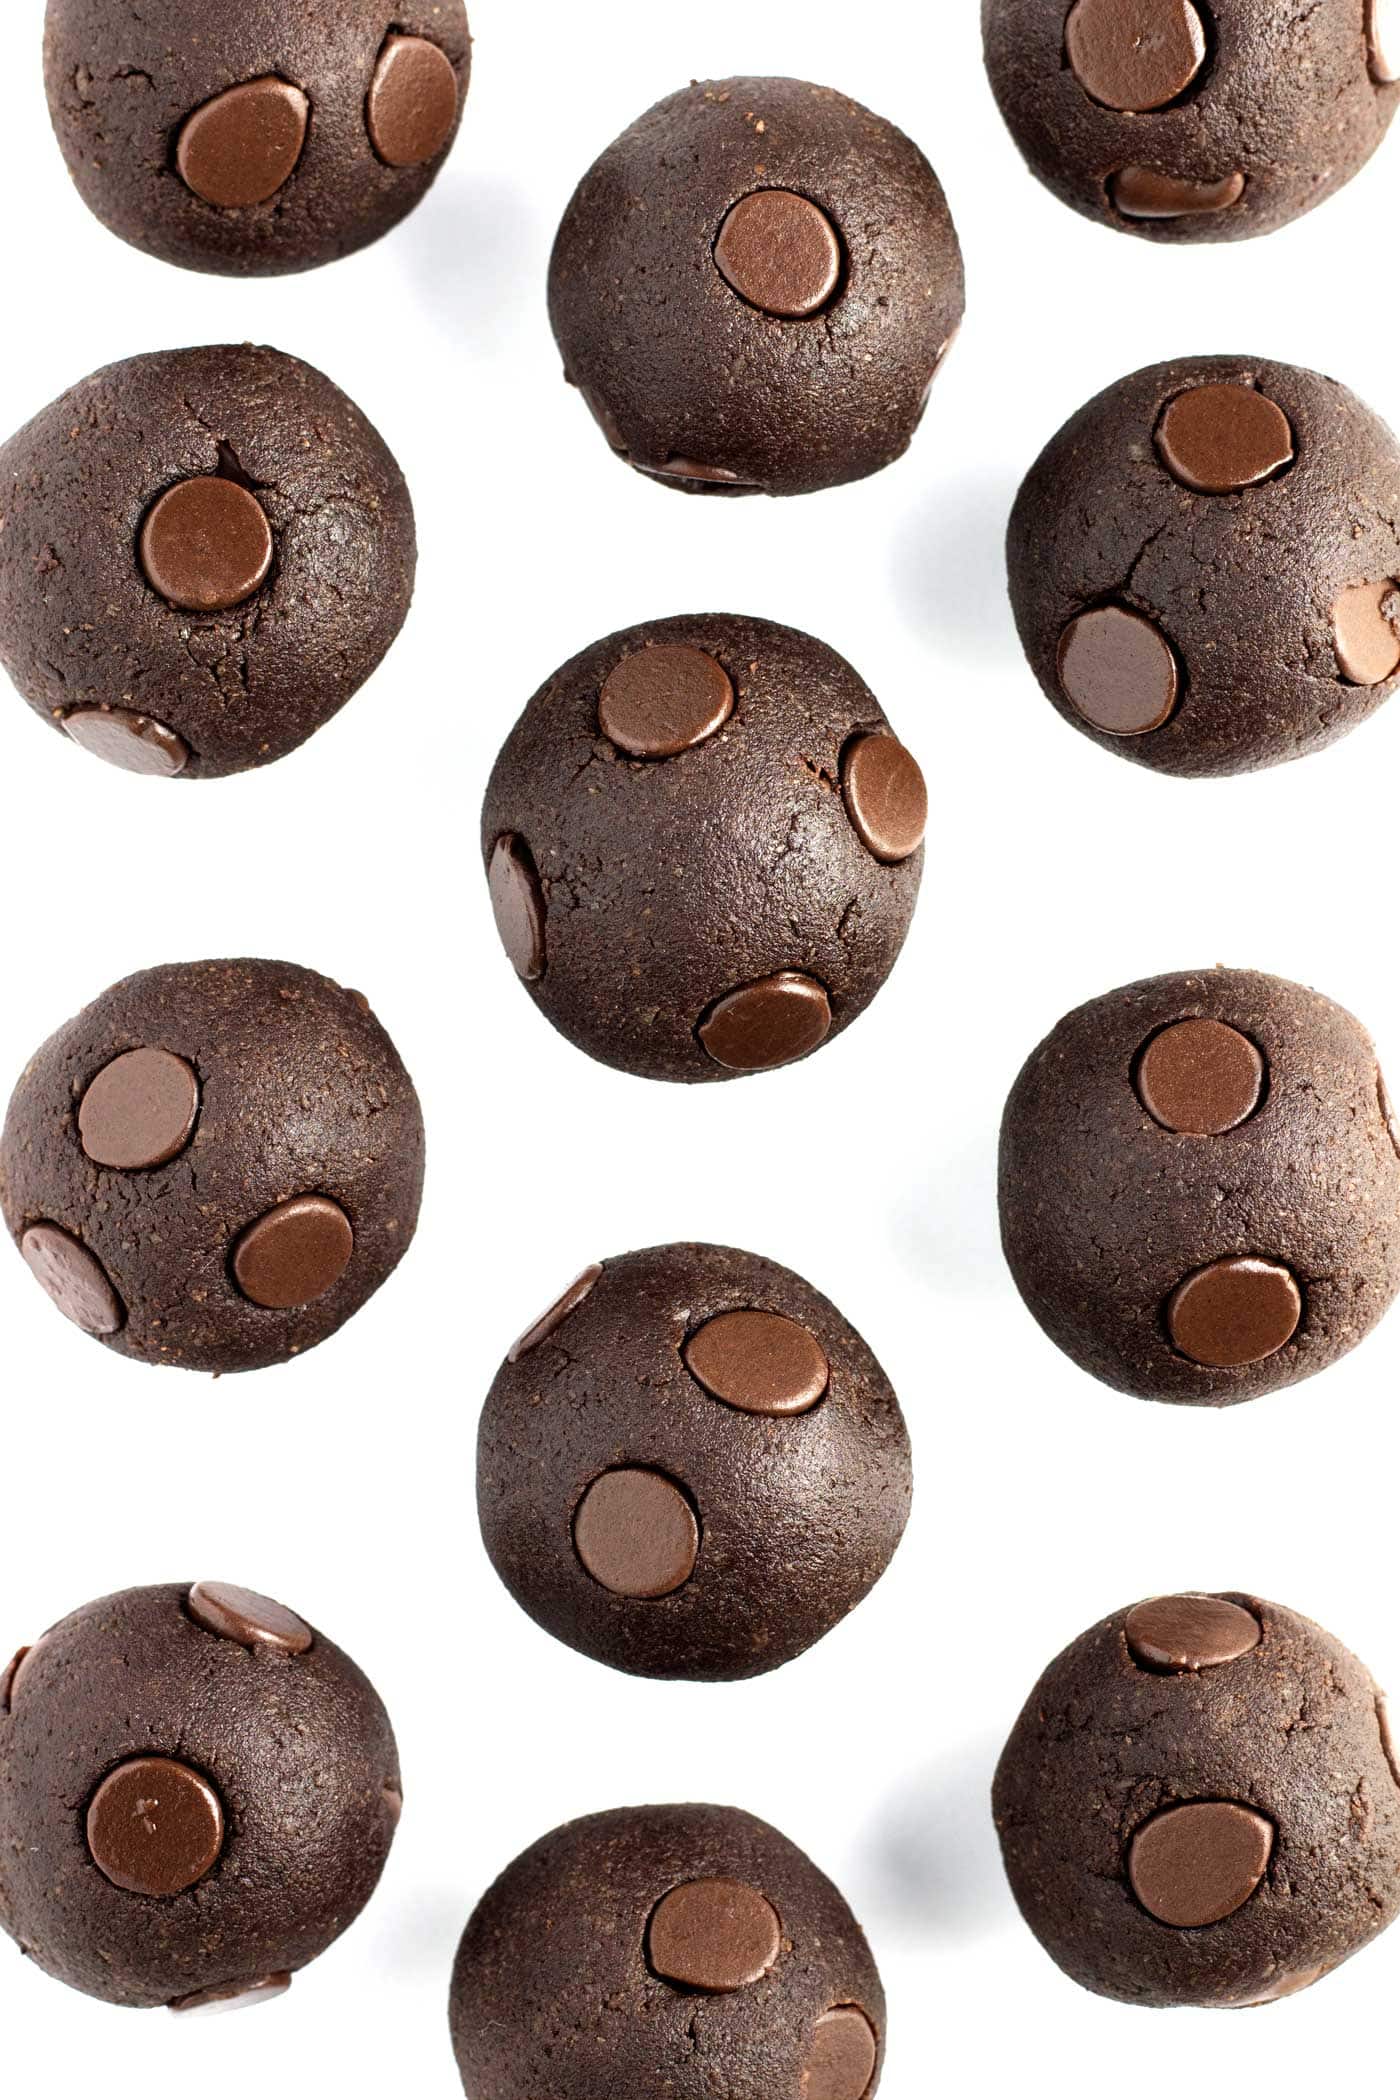 Raw brownie bites made in just 5 mins! The perfect quick dessert that won't ruin your diet! They are gluten free, dairy free, paleo, and vegan.